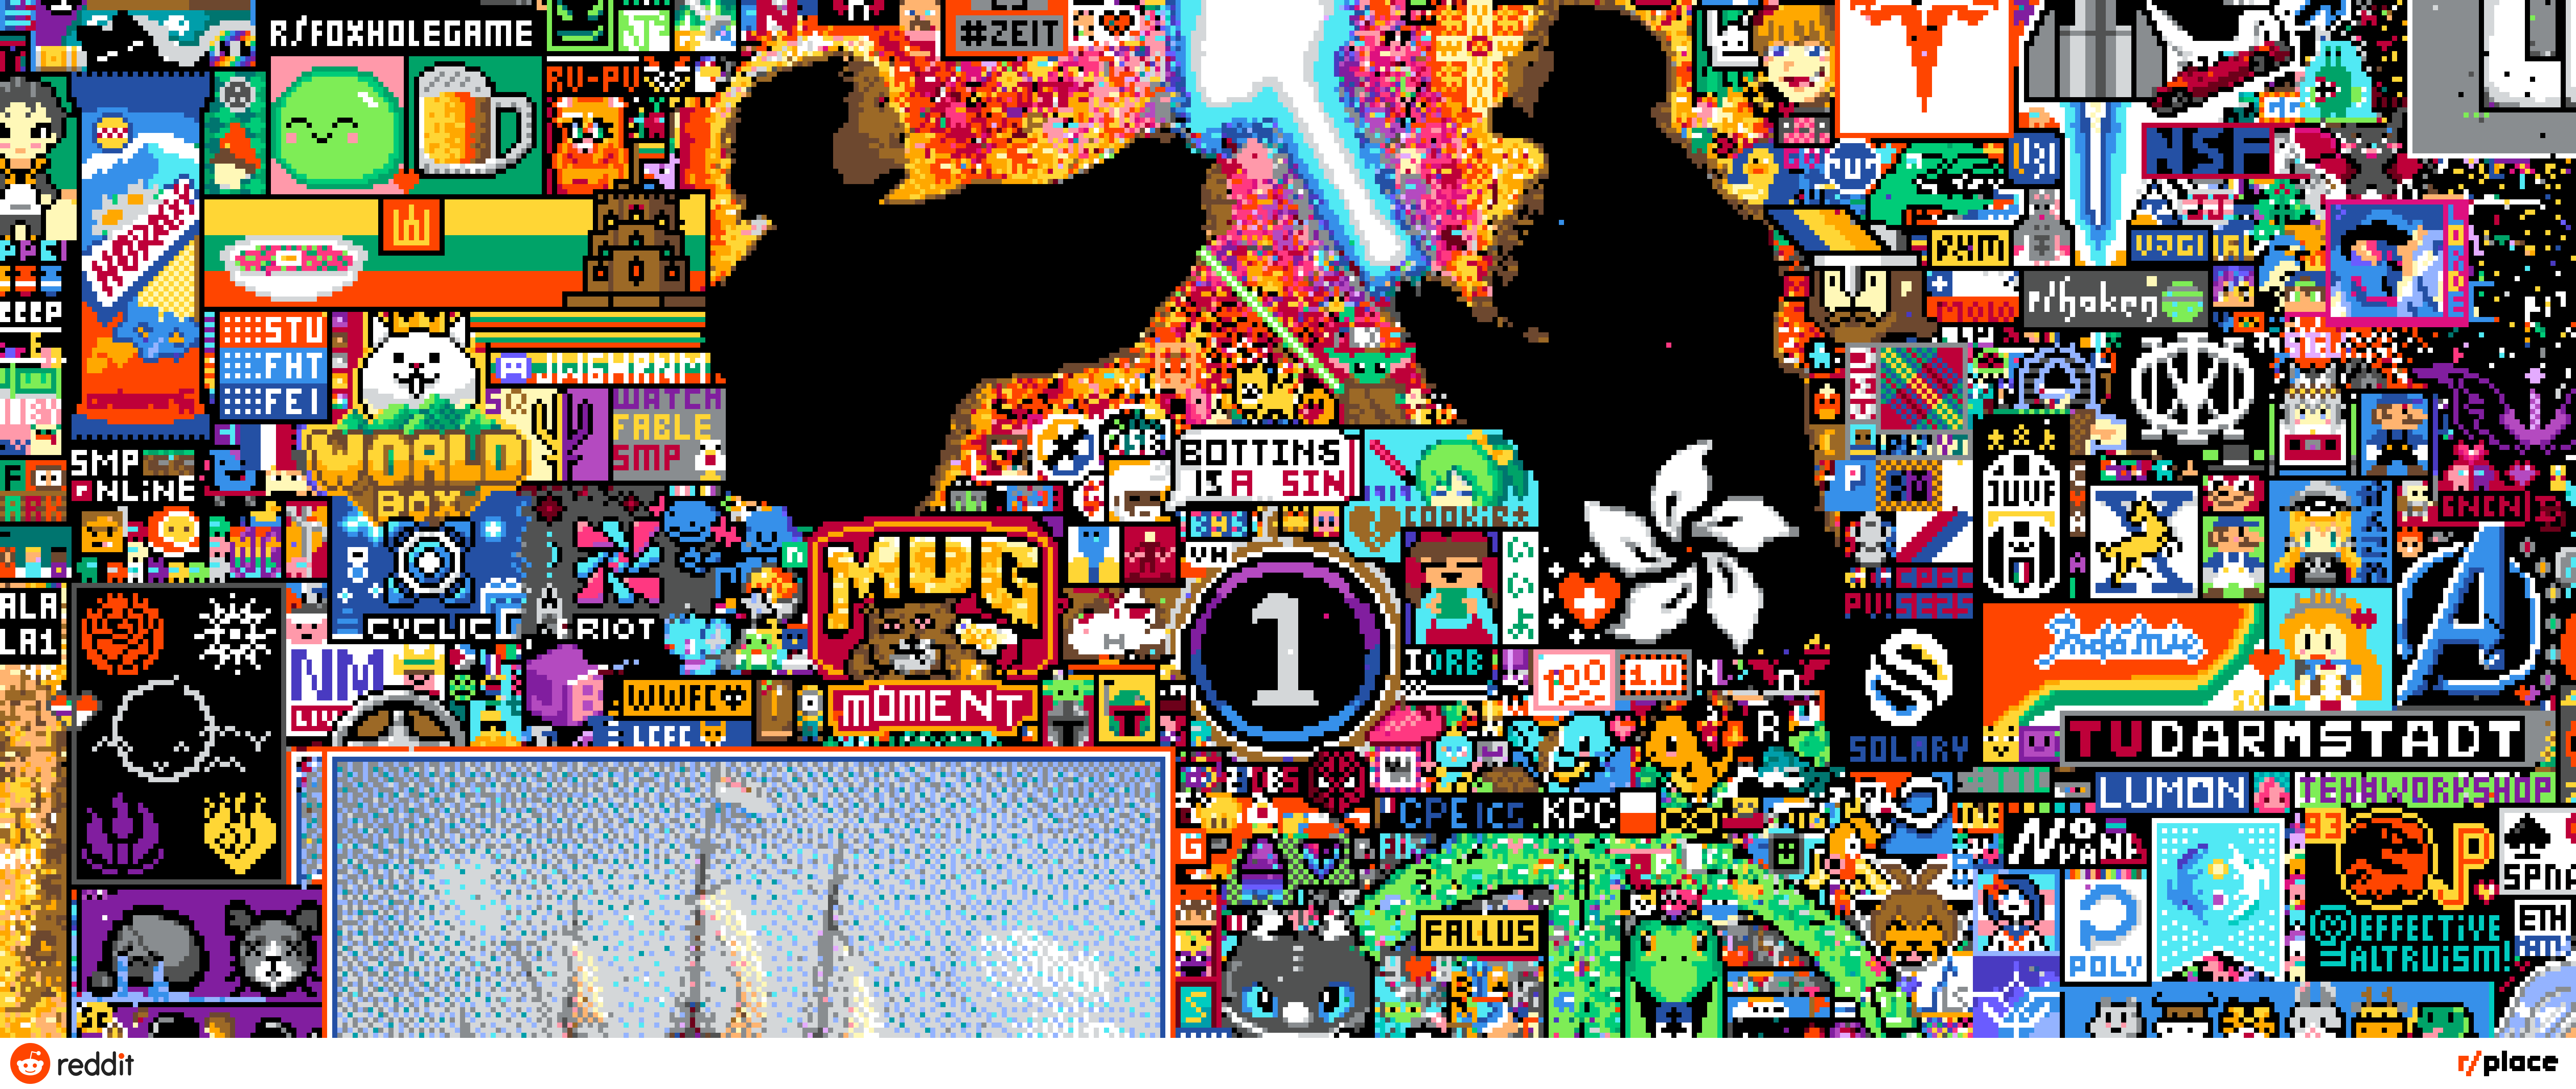 OSU! logo still standing on pixel anarchy online even after the